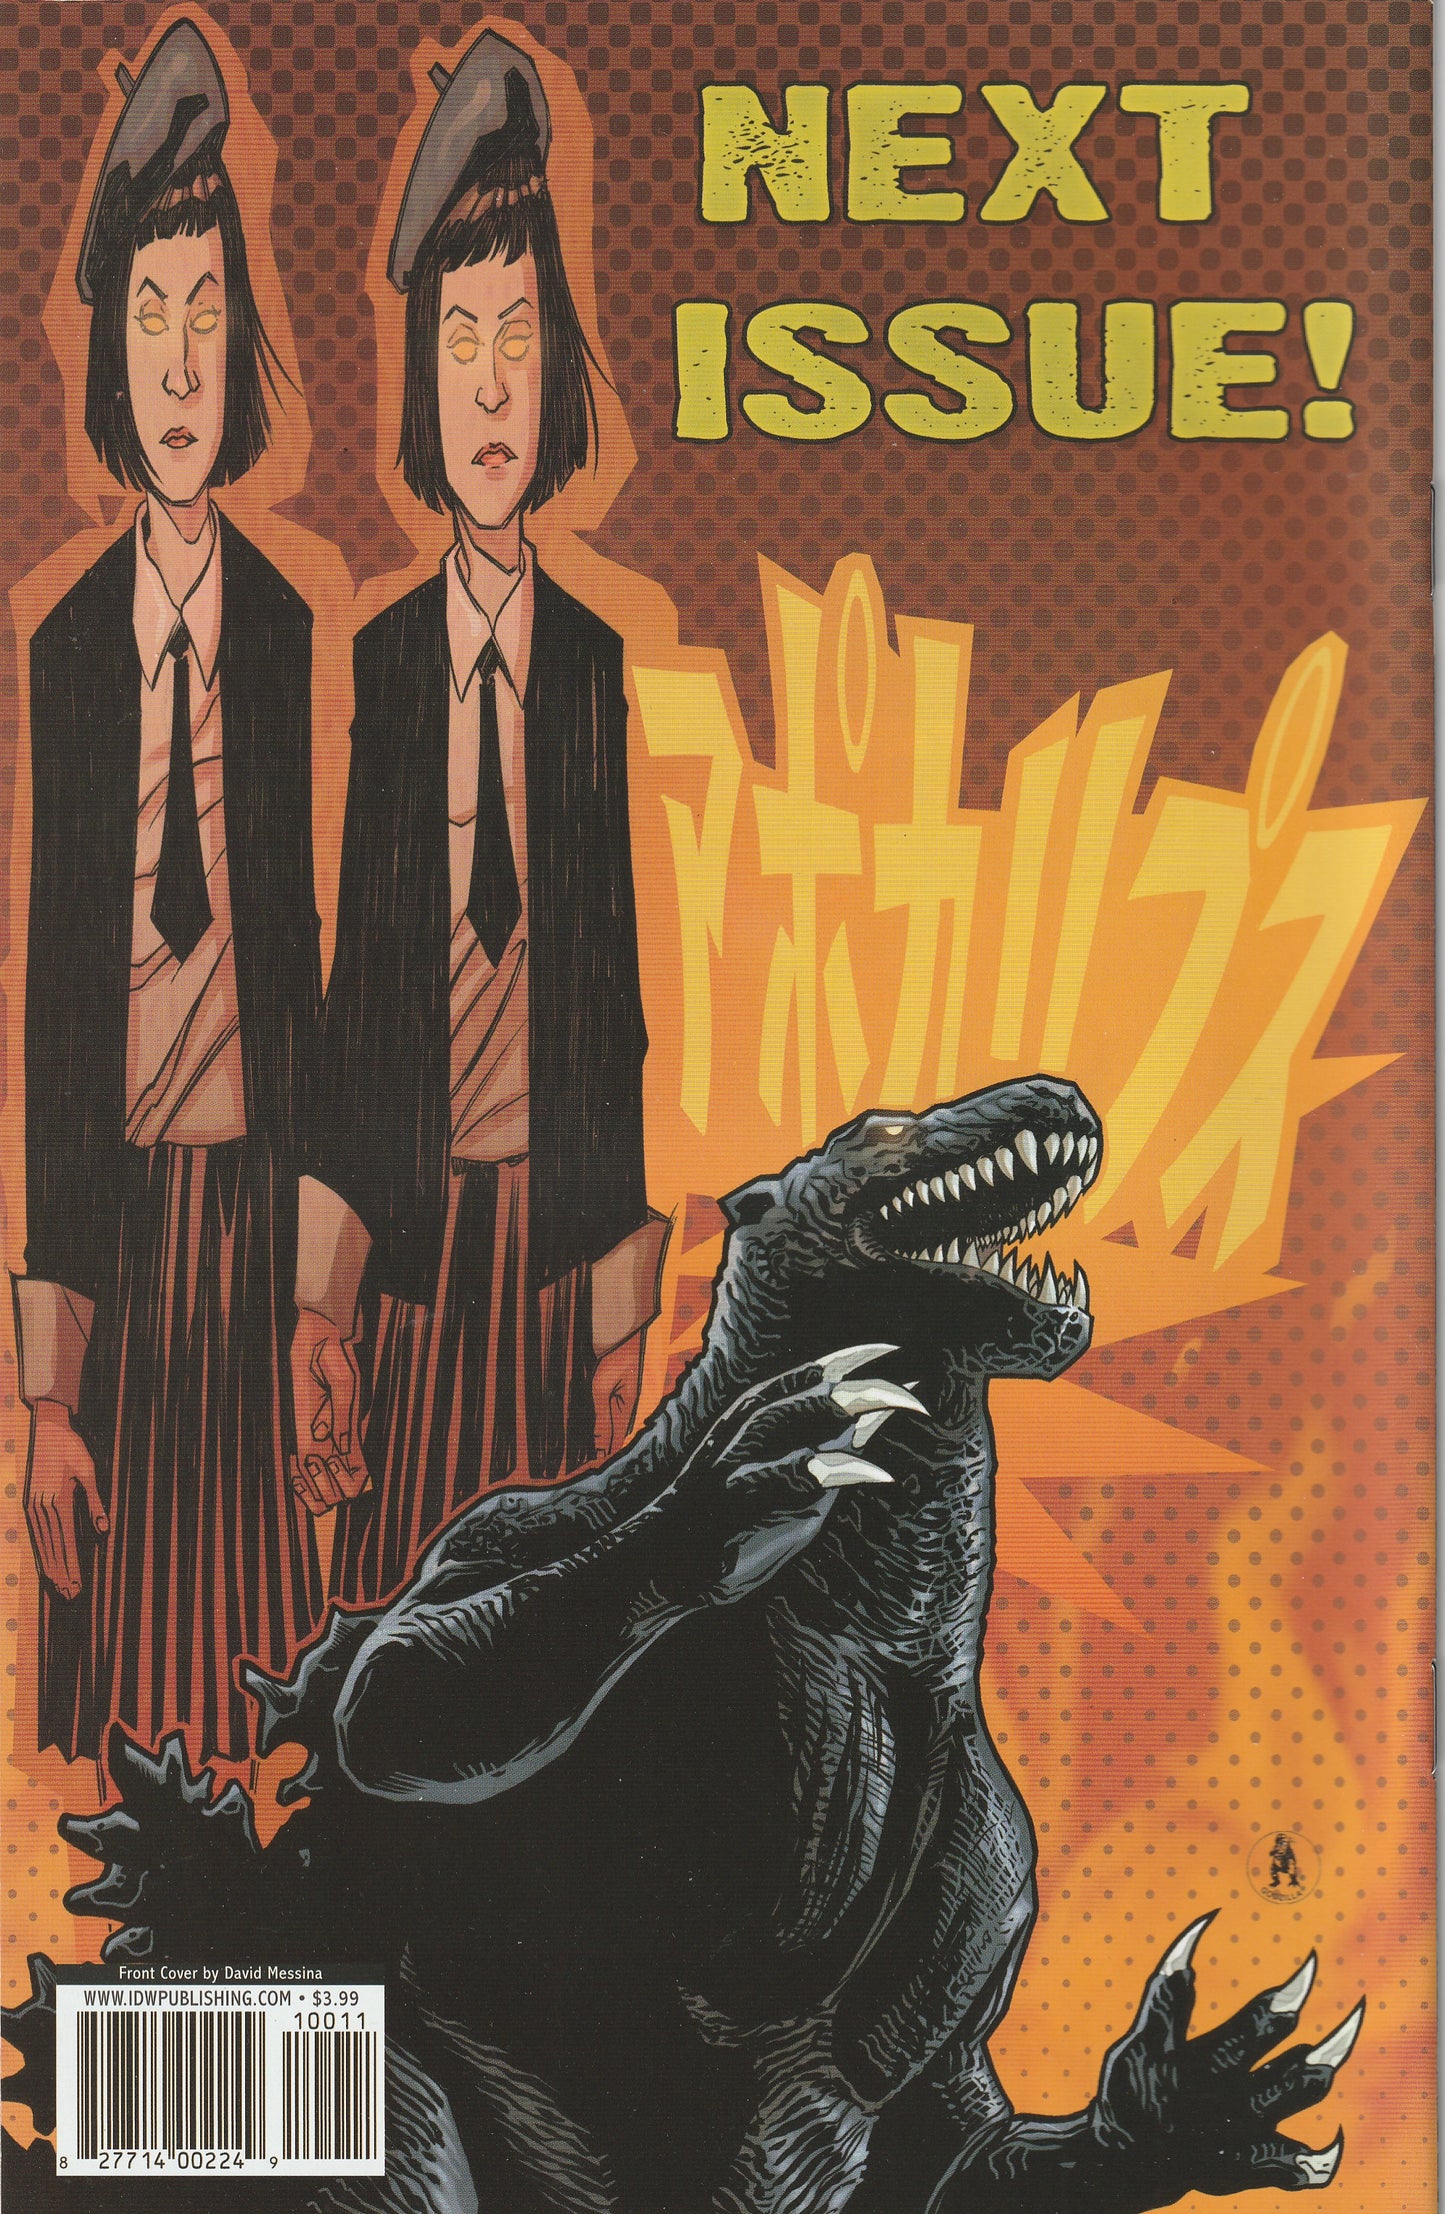 Godzilla Kingdom of Monsters #10 (2011) - Cover A by David Messina